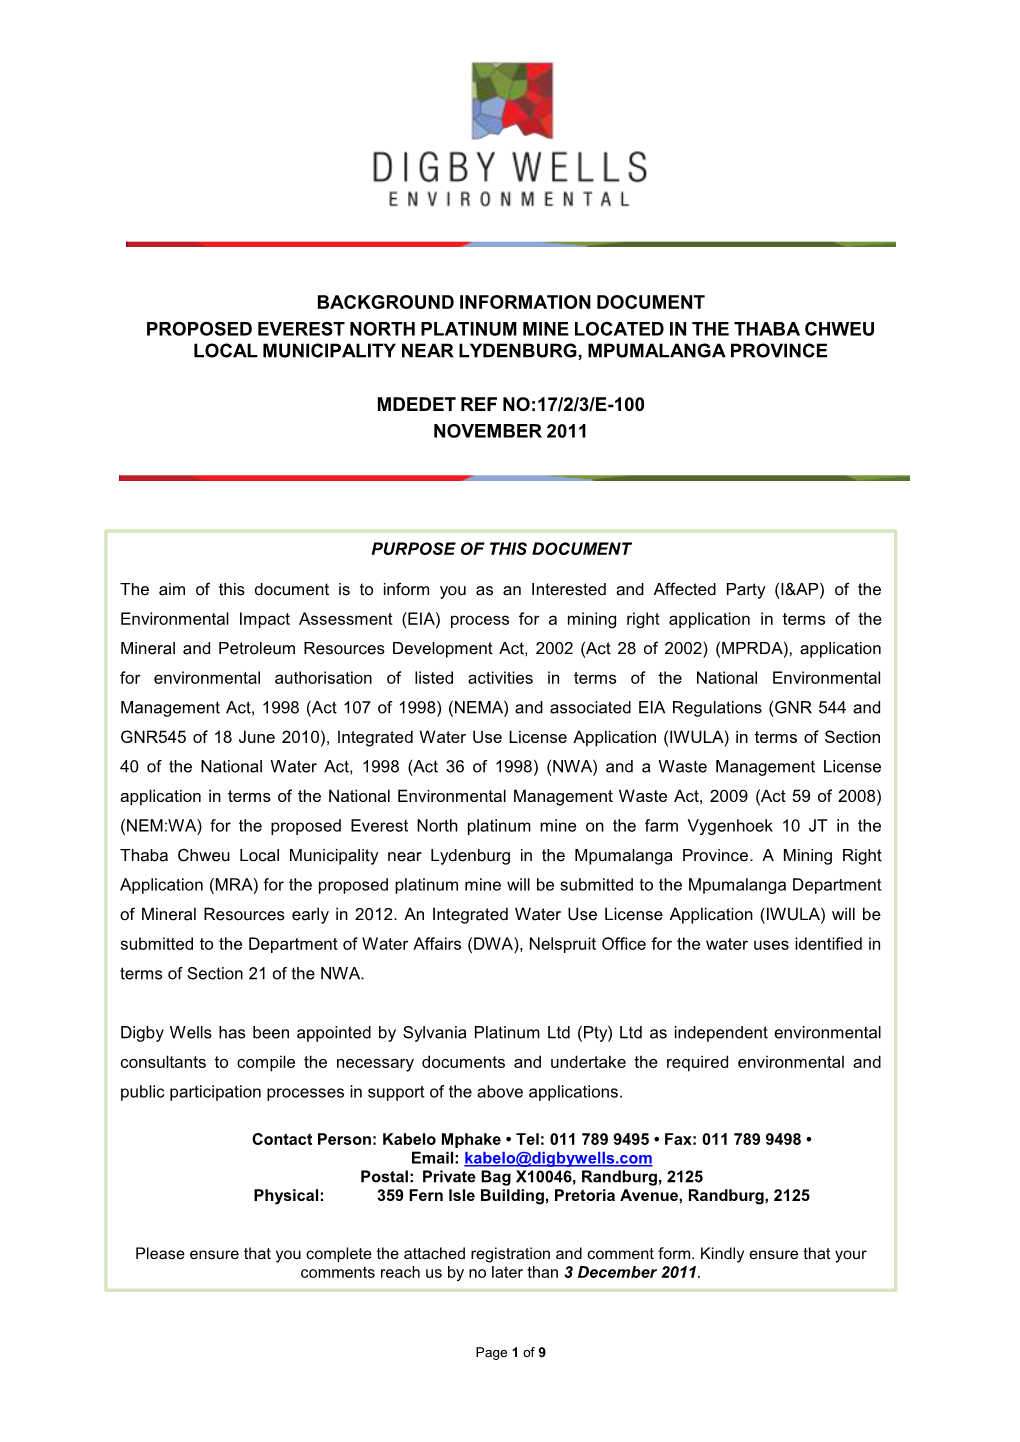 Background Information Document Proposed Everest North Platinum Mine Located in the Thaba Chweu Local Municipality Near Lydenburg, Mpumalanga Province